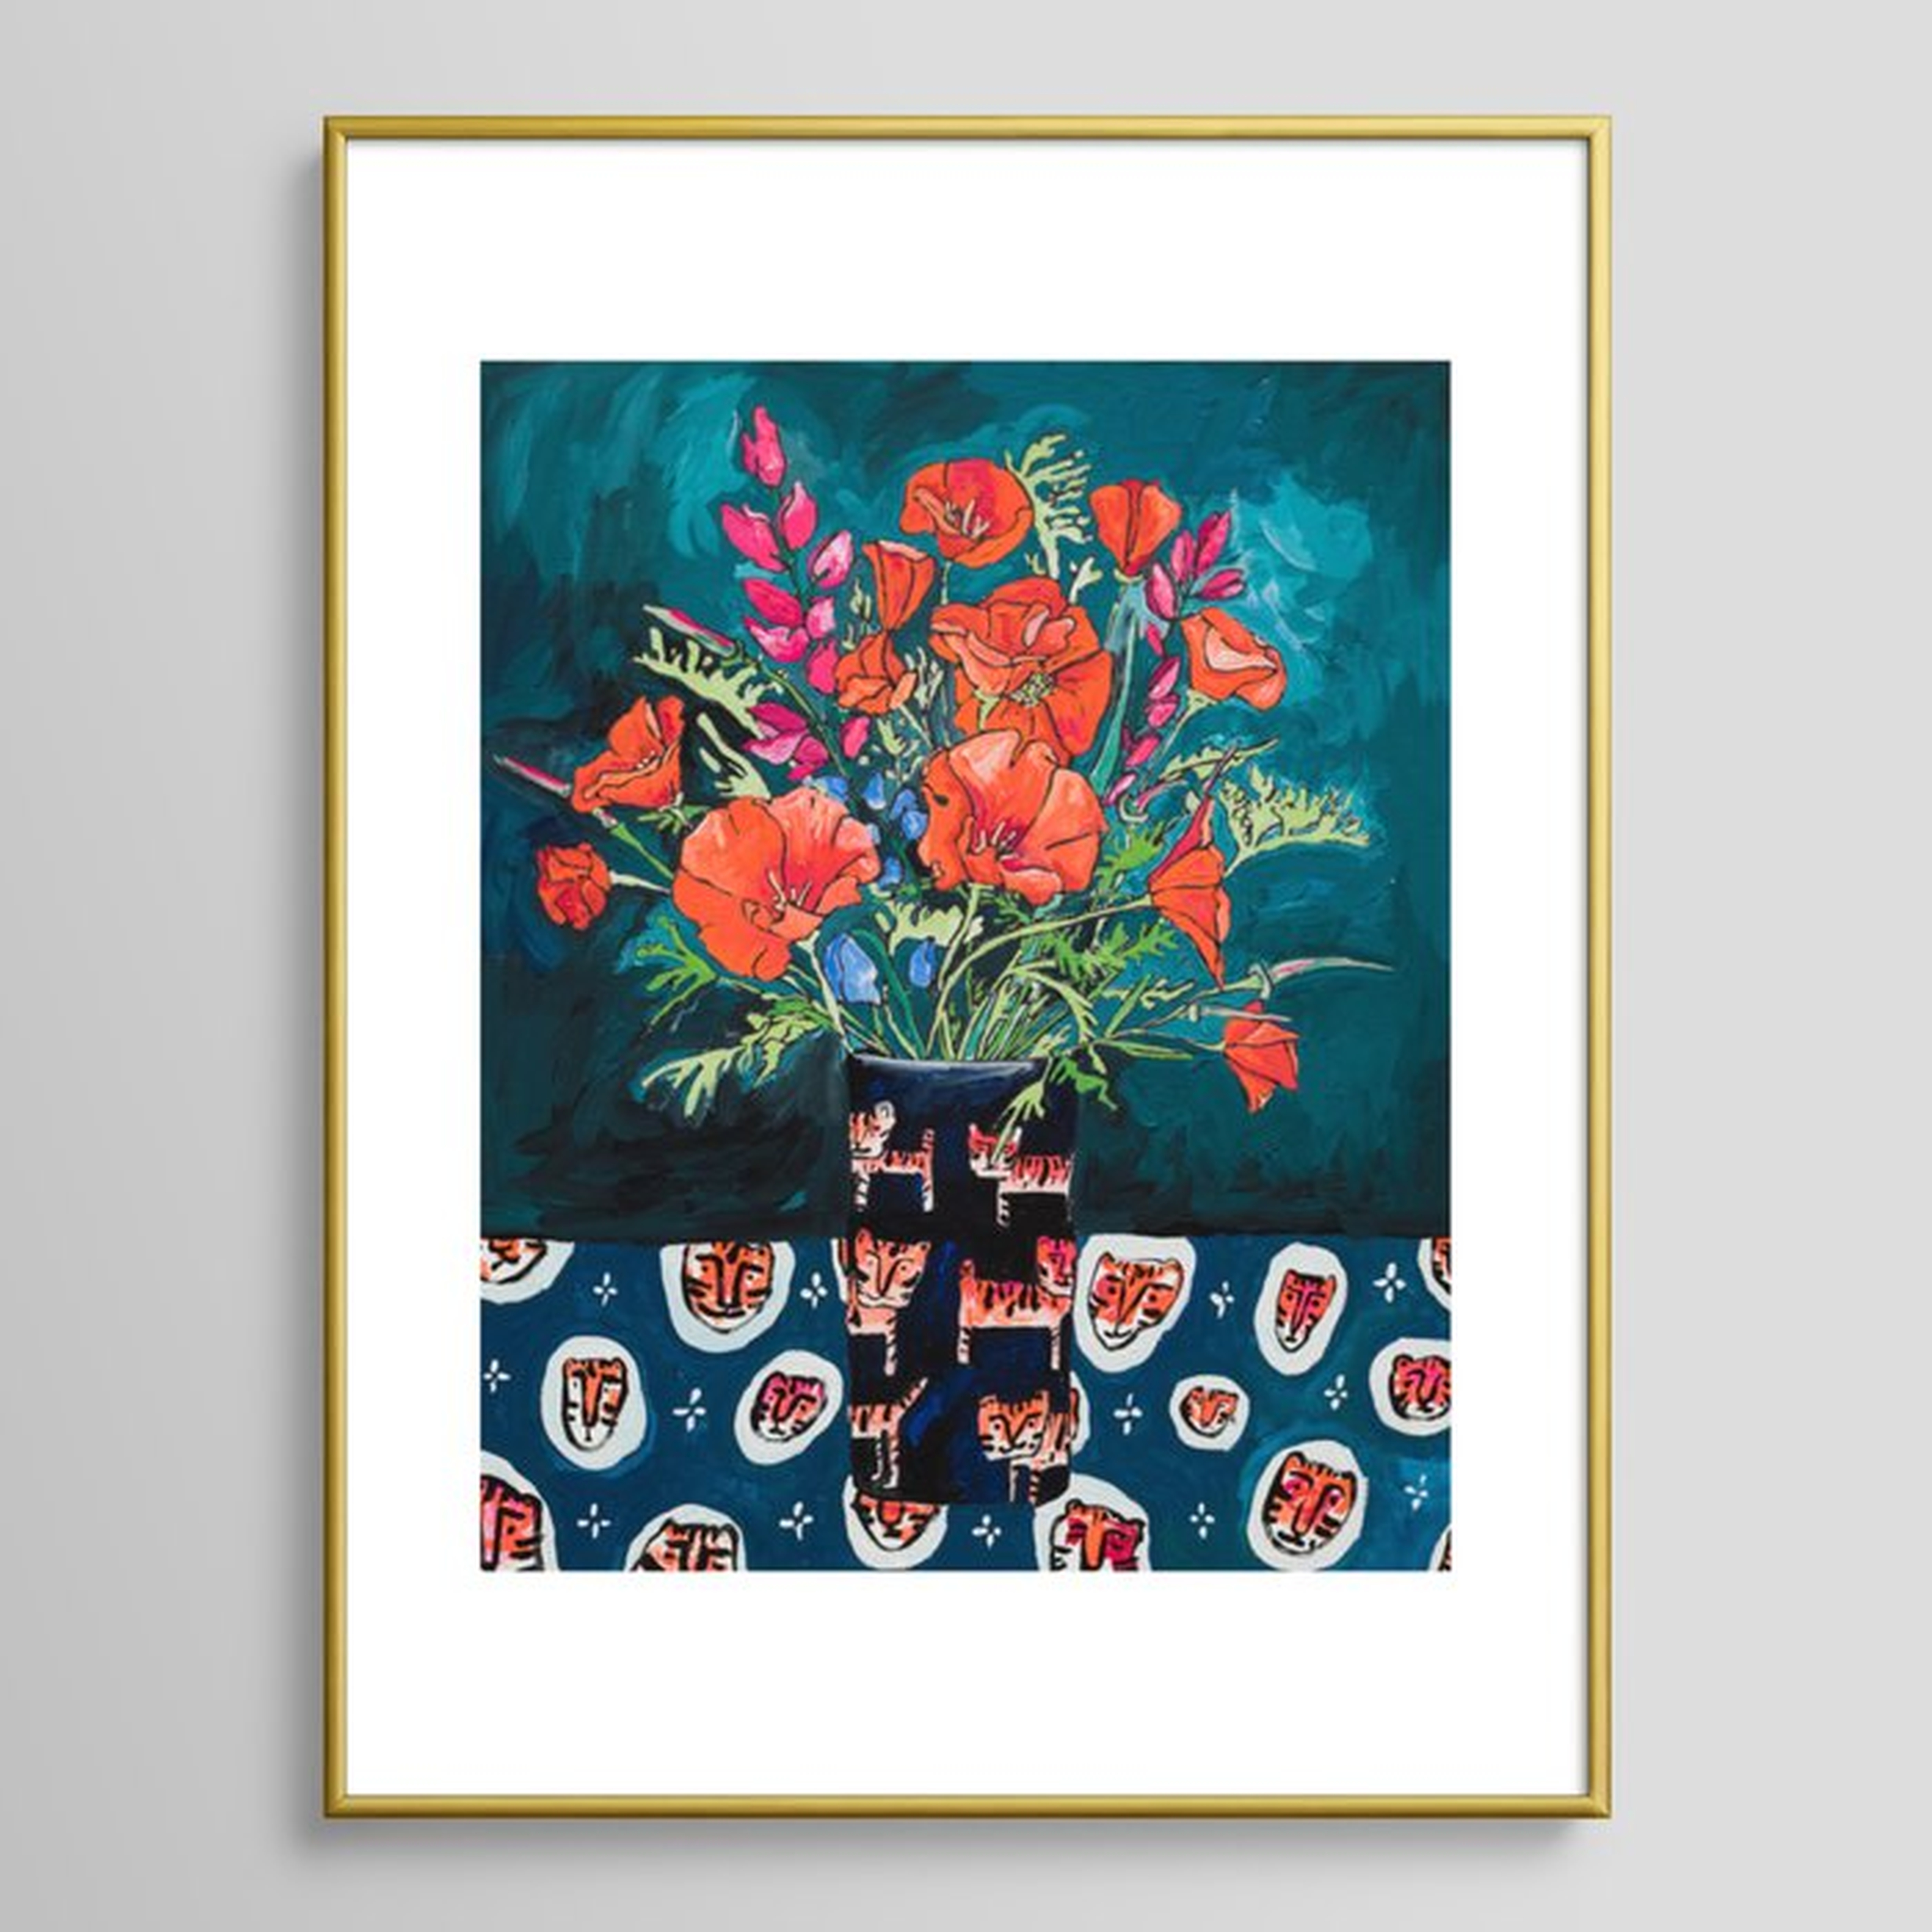 California Poppy and Wildflower Bouquet on Emerald with Tigers Still Life Painting Framed Art Print - Society6